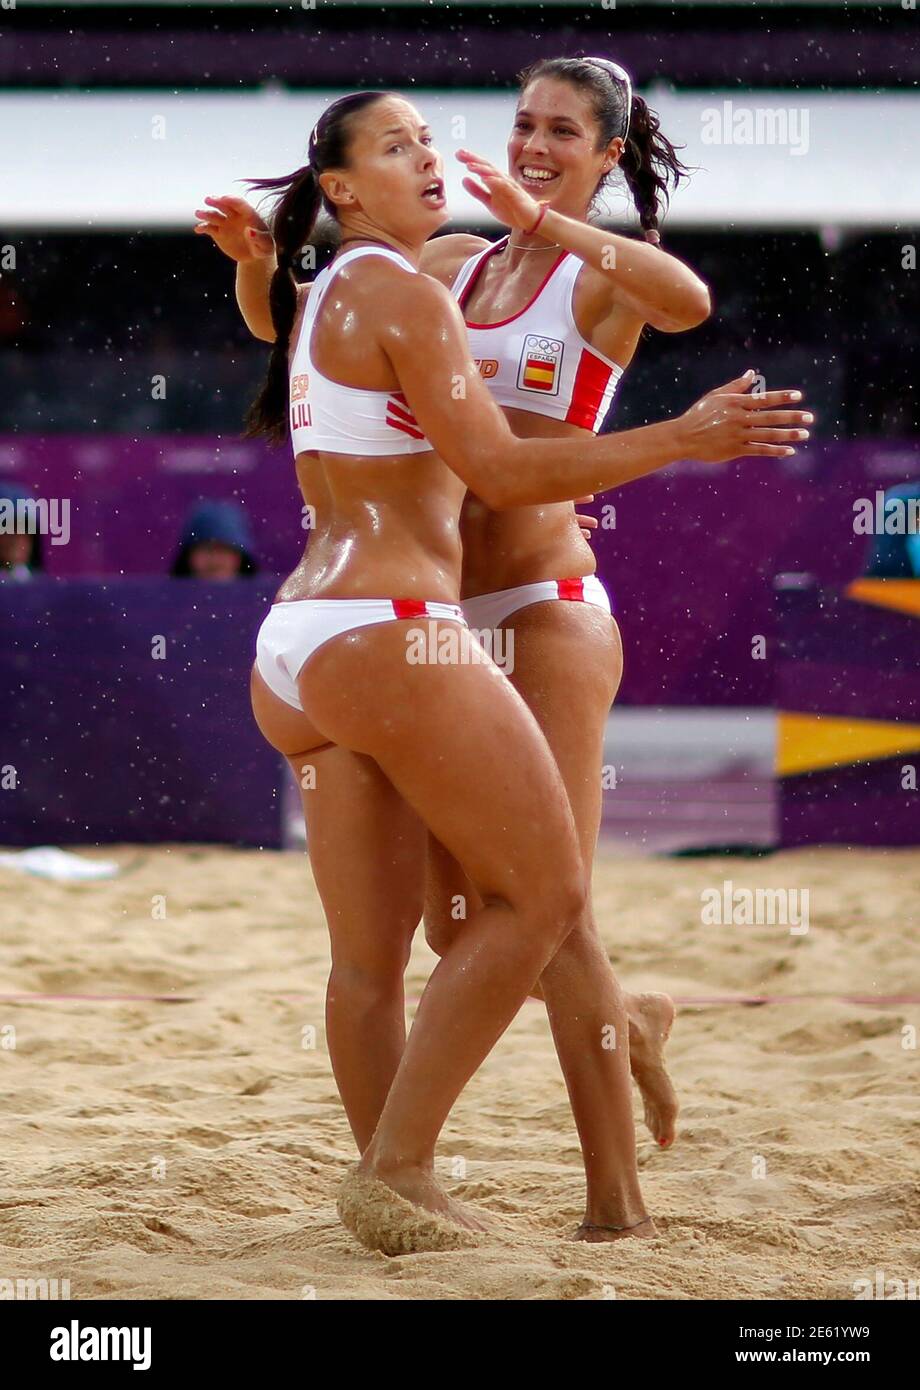 Spain's Liliana Fernandez Steiner and teammate Elsa Baquerizo McMillan (R)  celebrate a point during their women's beach volleyball preliminary round  match against the Netherlands at the London 2012 Olympics Games at the